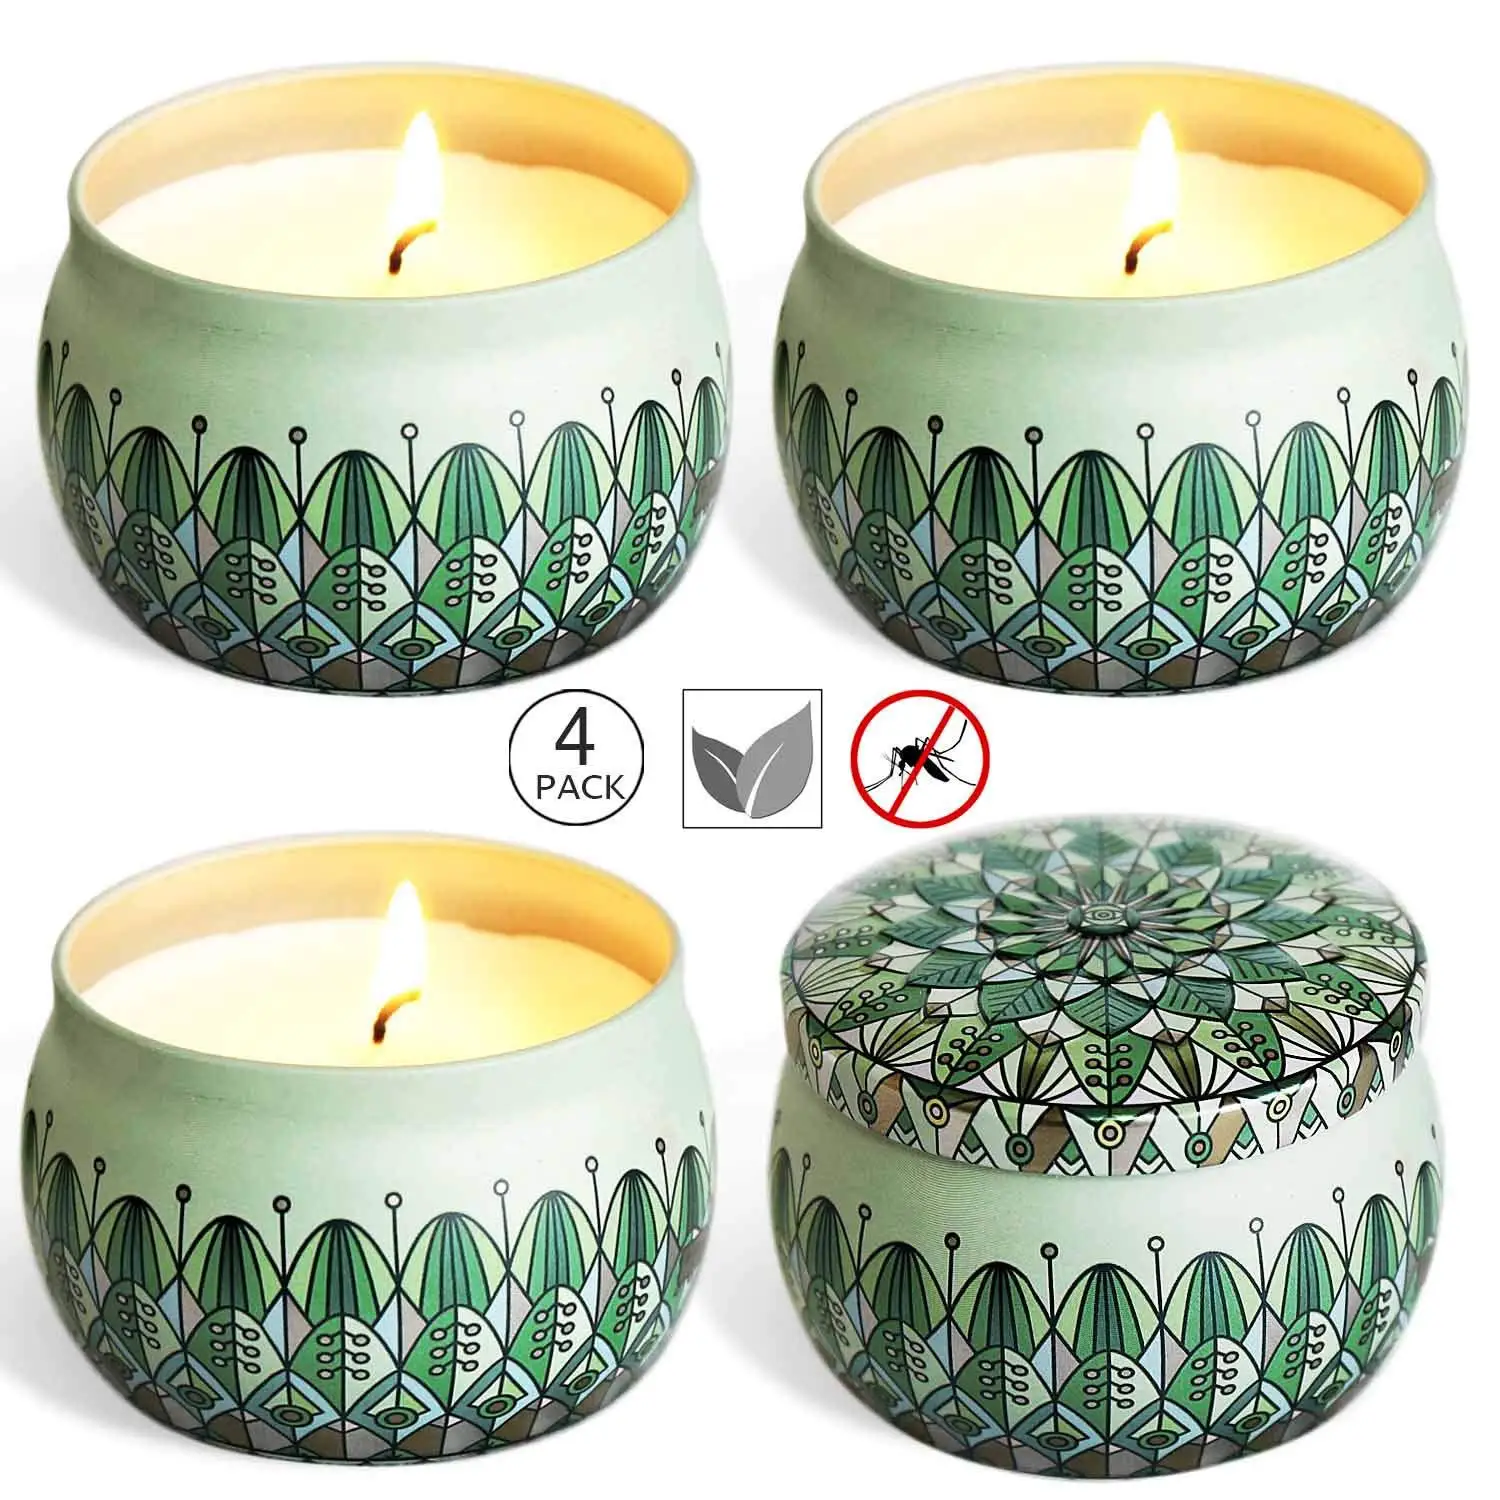 

Citronella oil soy wax scented candle smoke-free environmental protection four piece Candle Set